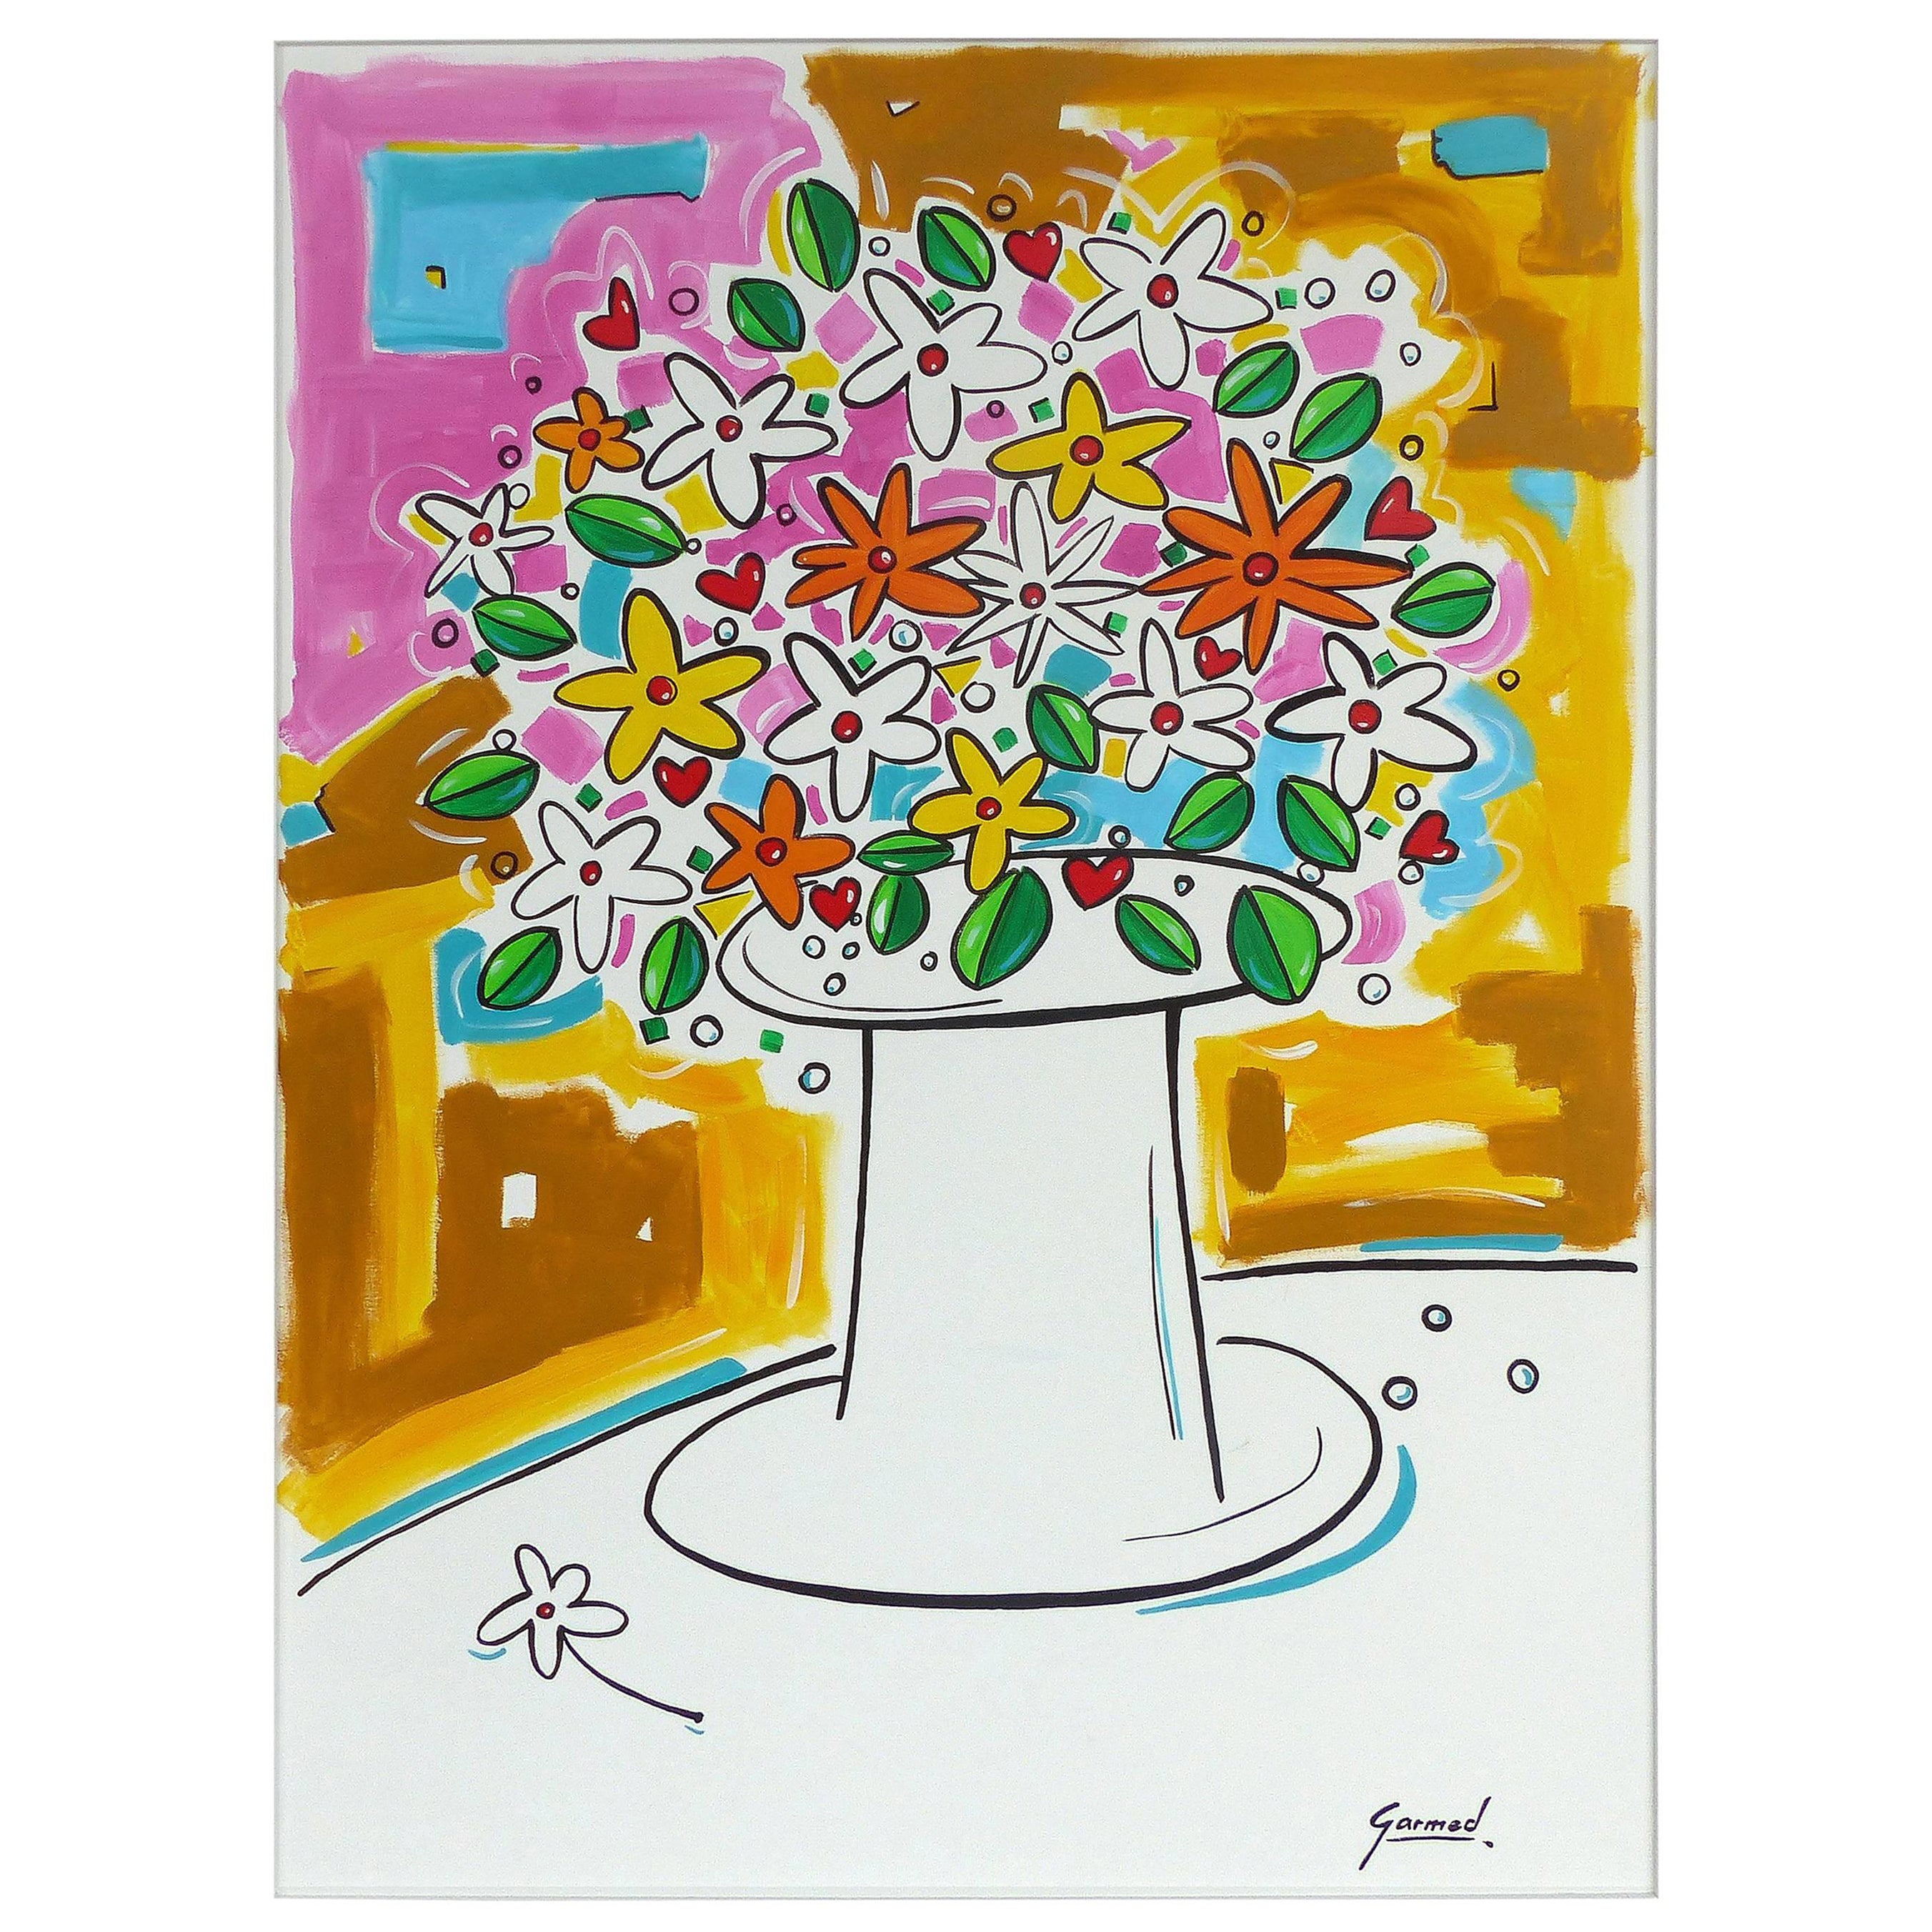 Vintage Abstract Floral Still Life Painting, "Love" by Garmed For Sale